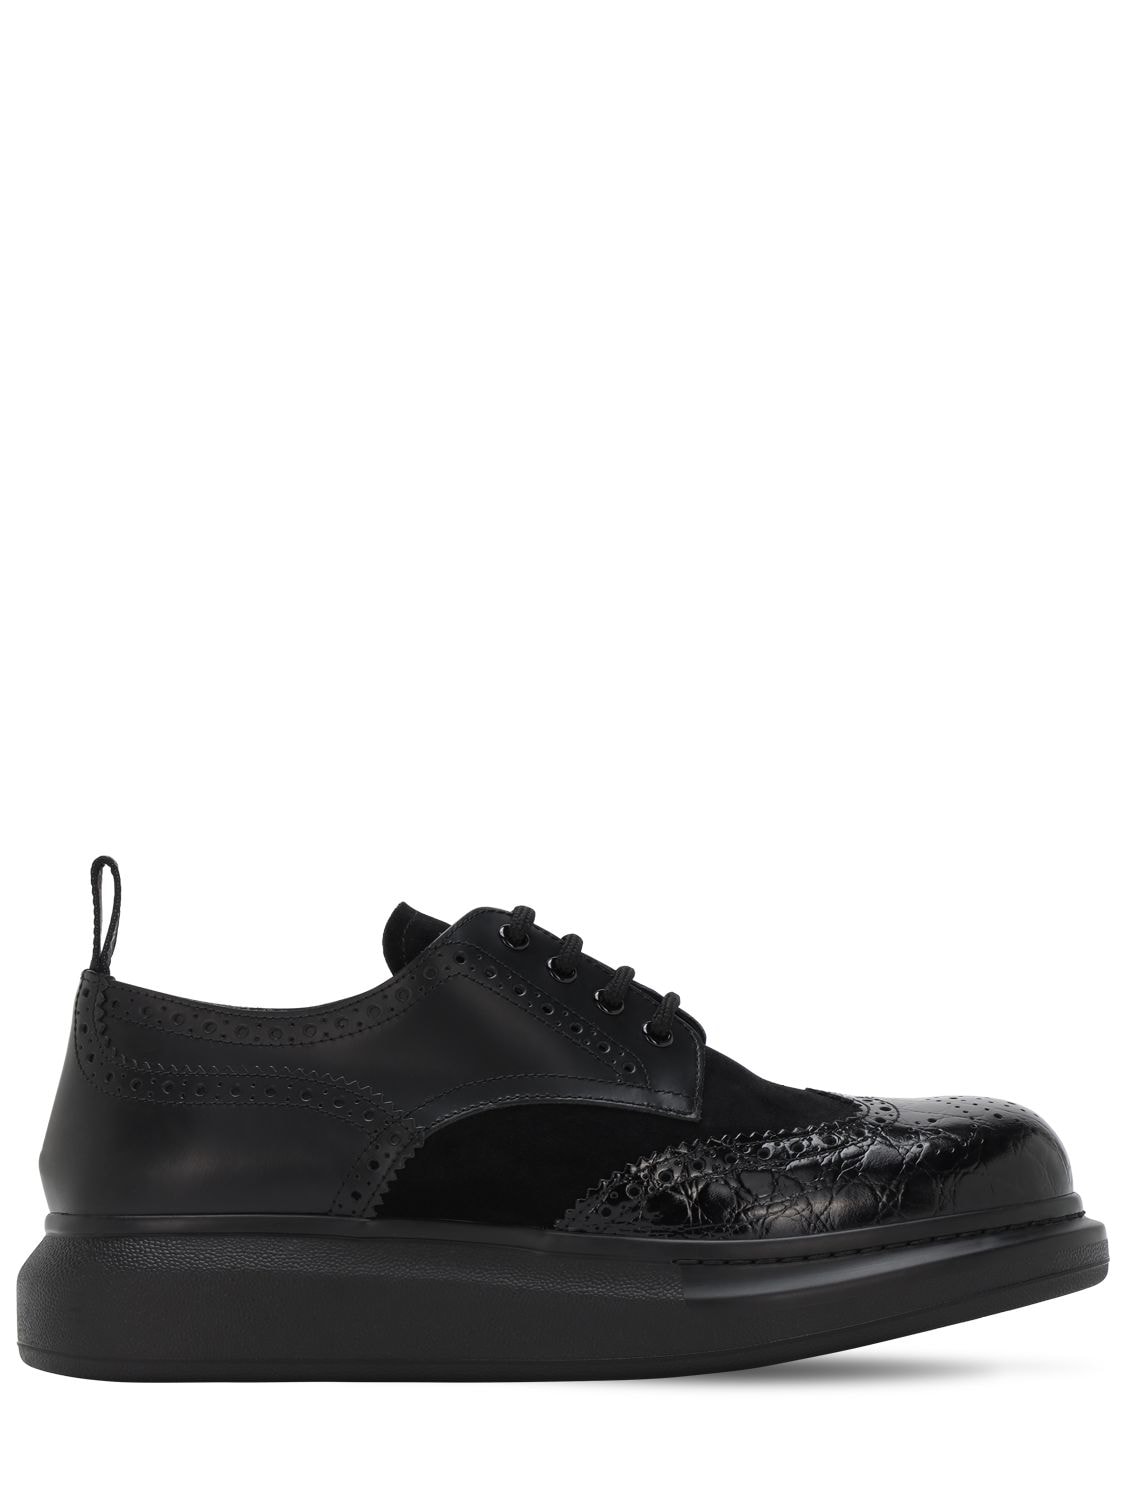 alexander mcqueen lace up shoes